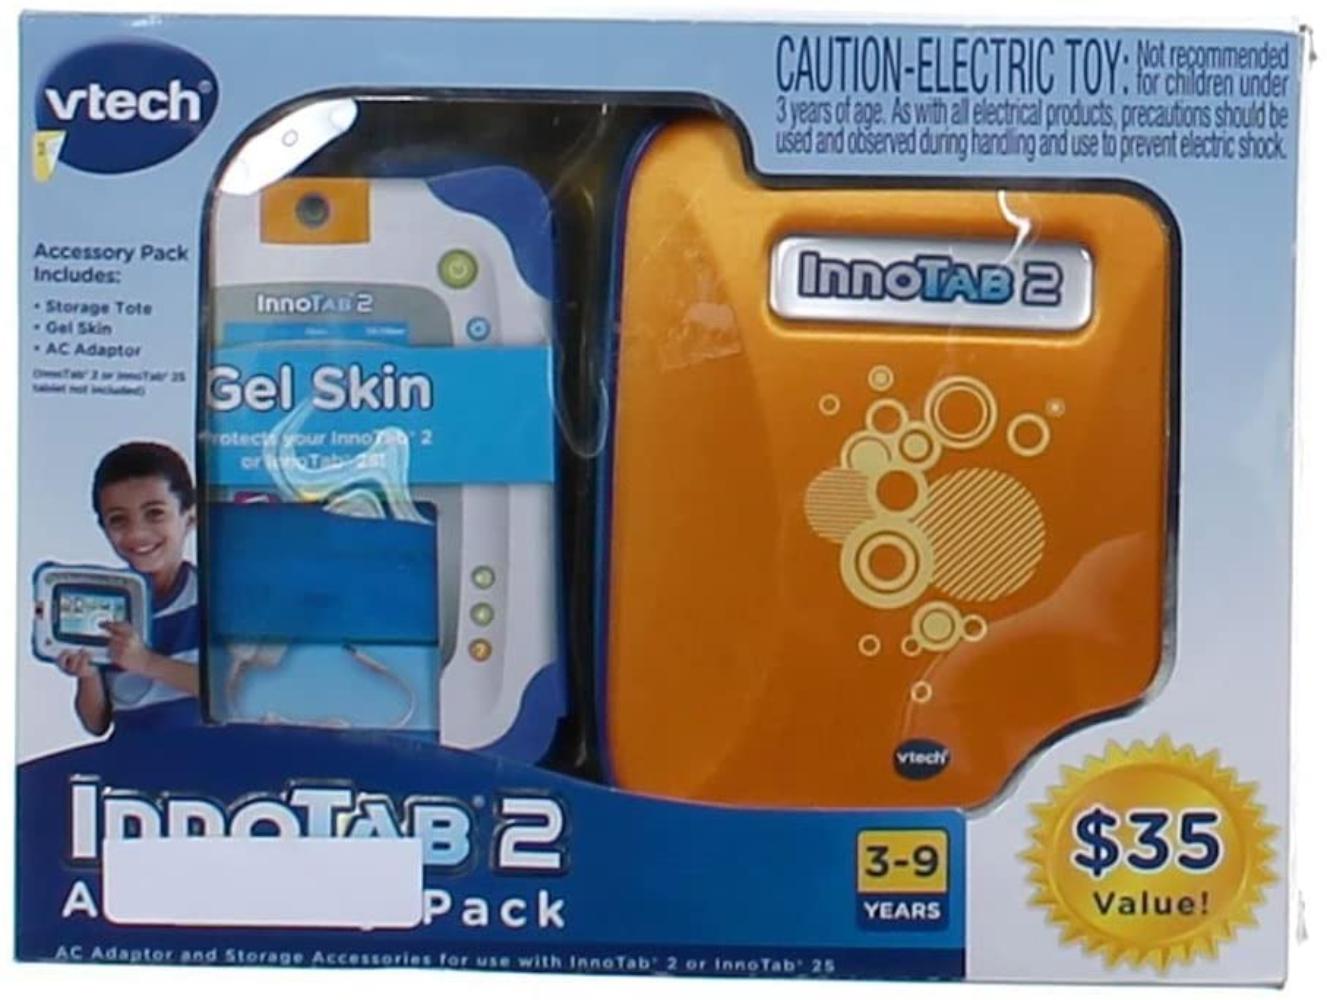 Vtech Innotab 2 Accessory Pack, Age Range: 3-9 years By Brand VTech